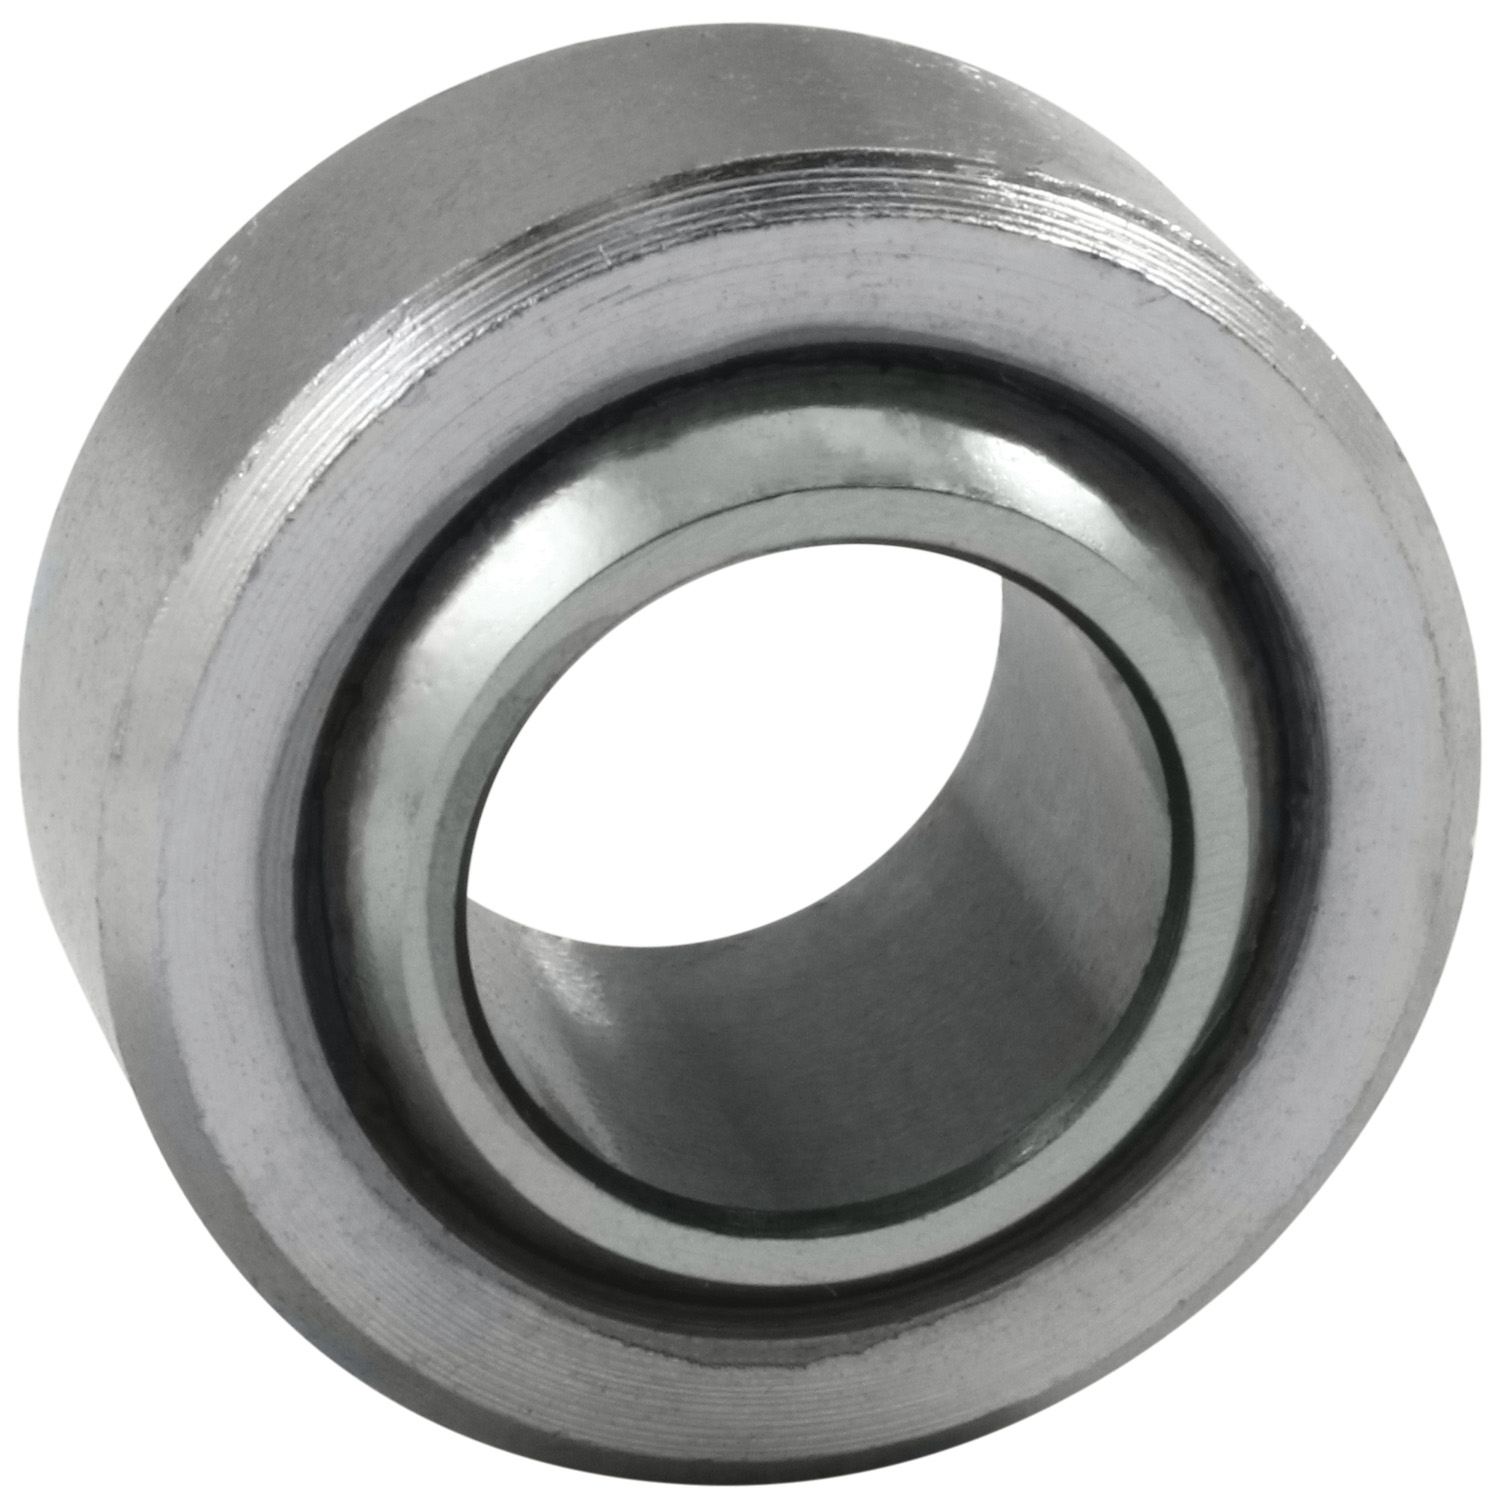 CASTER/CAMBER BEARING